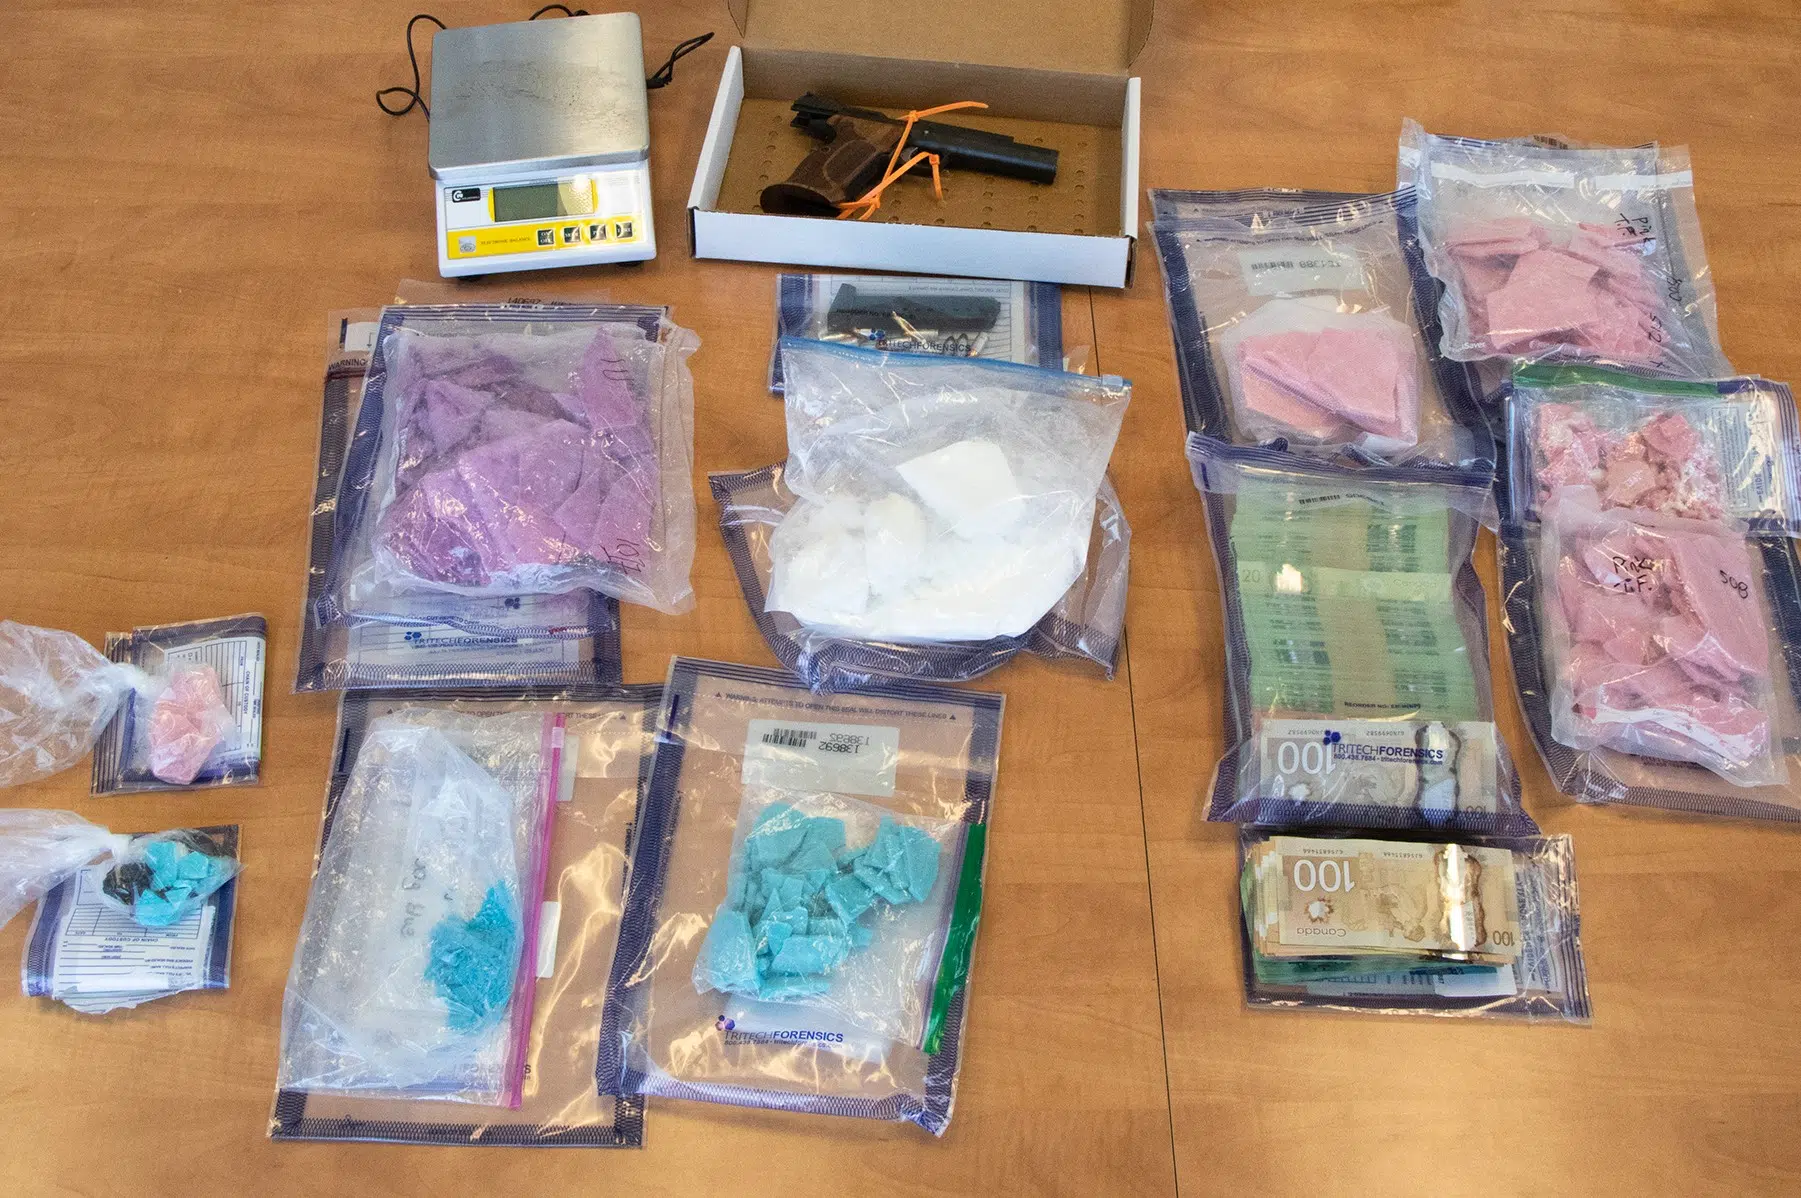 Thousands of fentanyl doses worth more than $1M seized in Regina